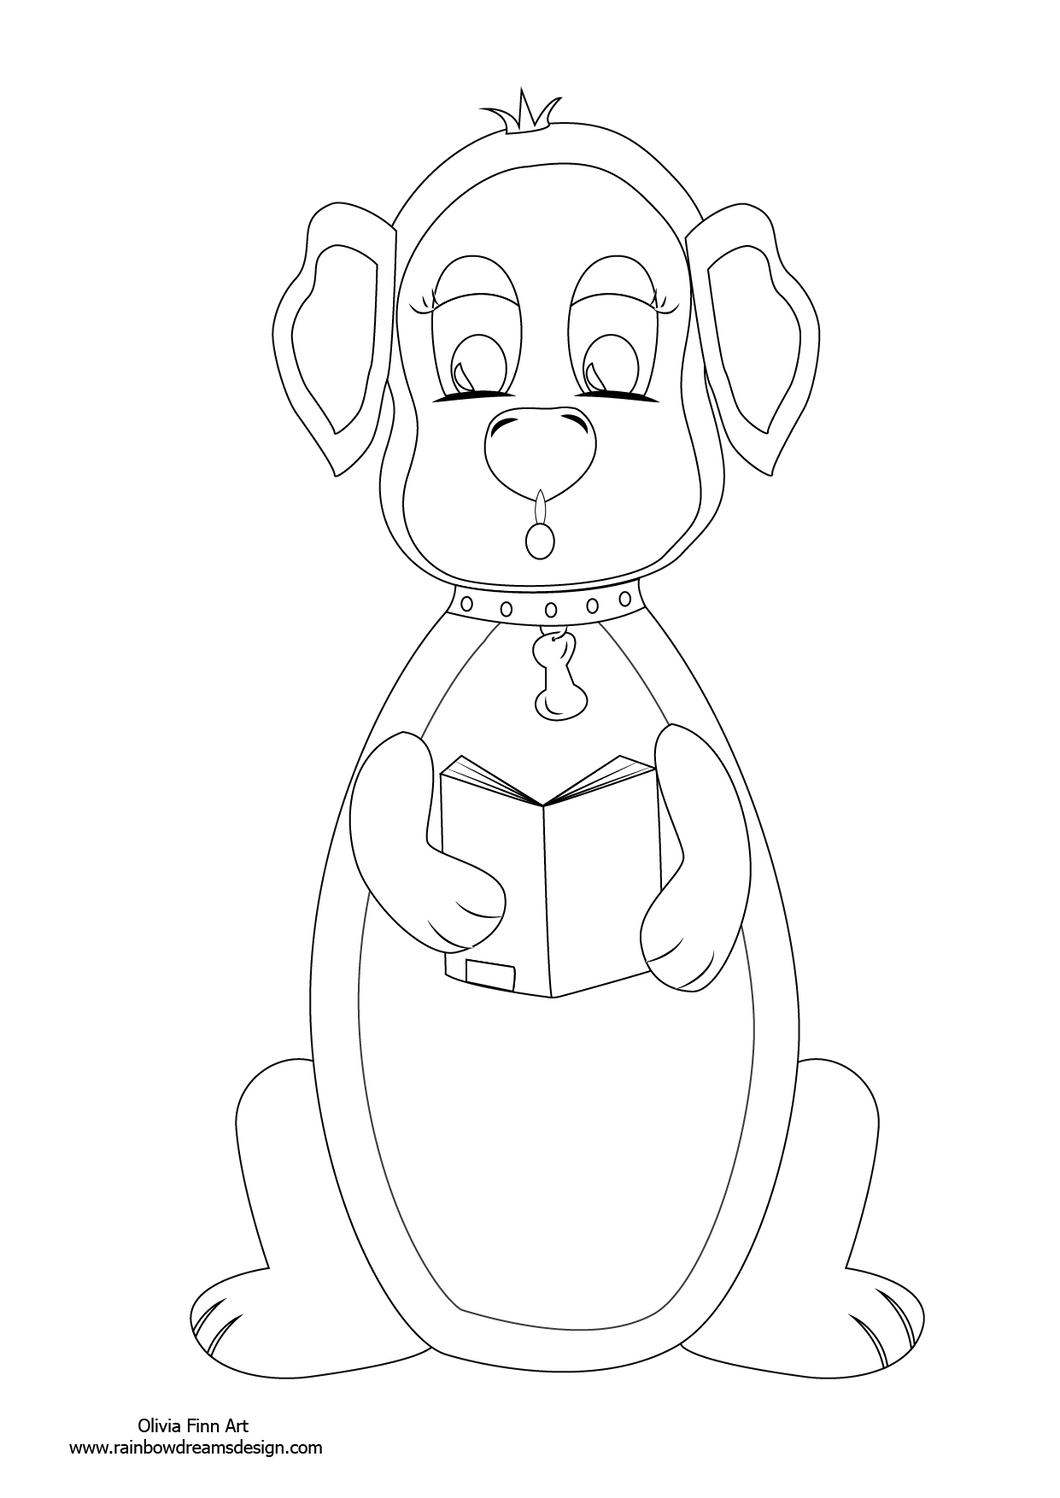 Colouring Page - Dog Reading